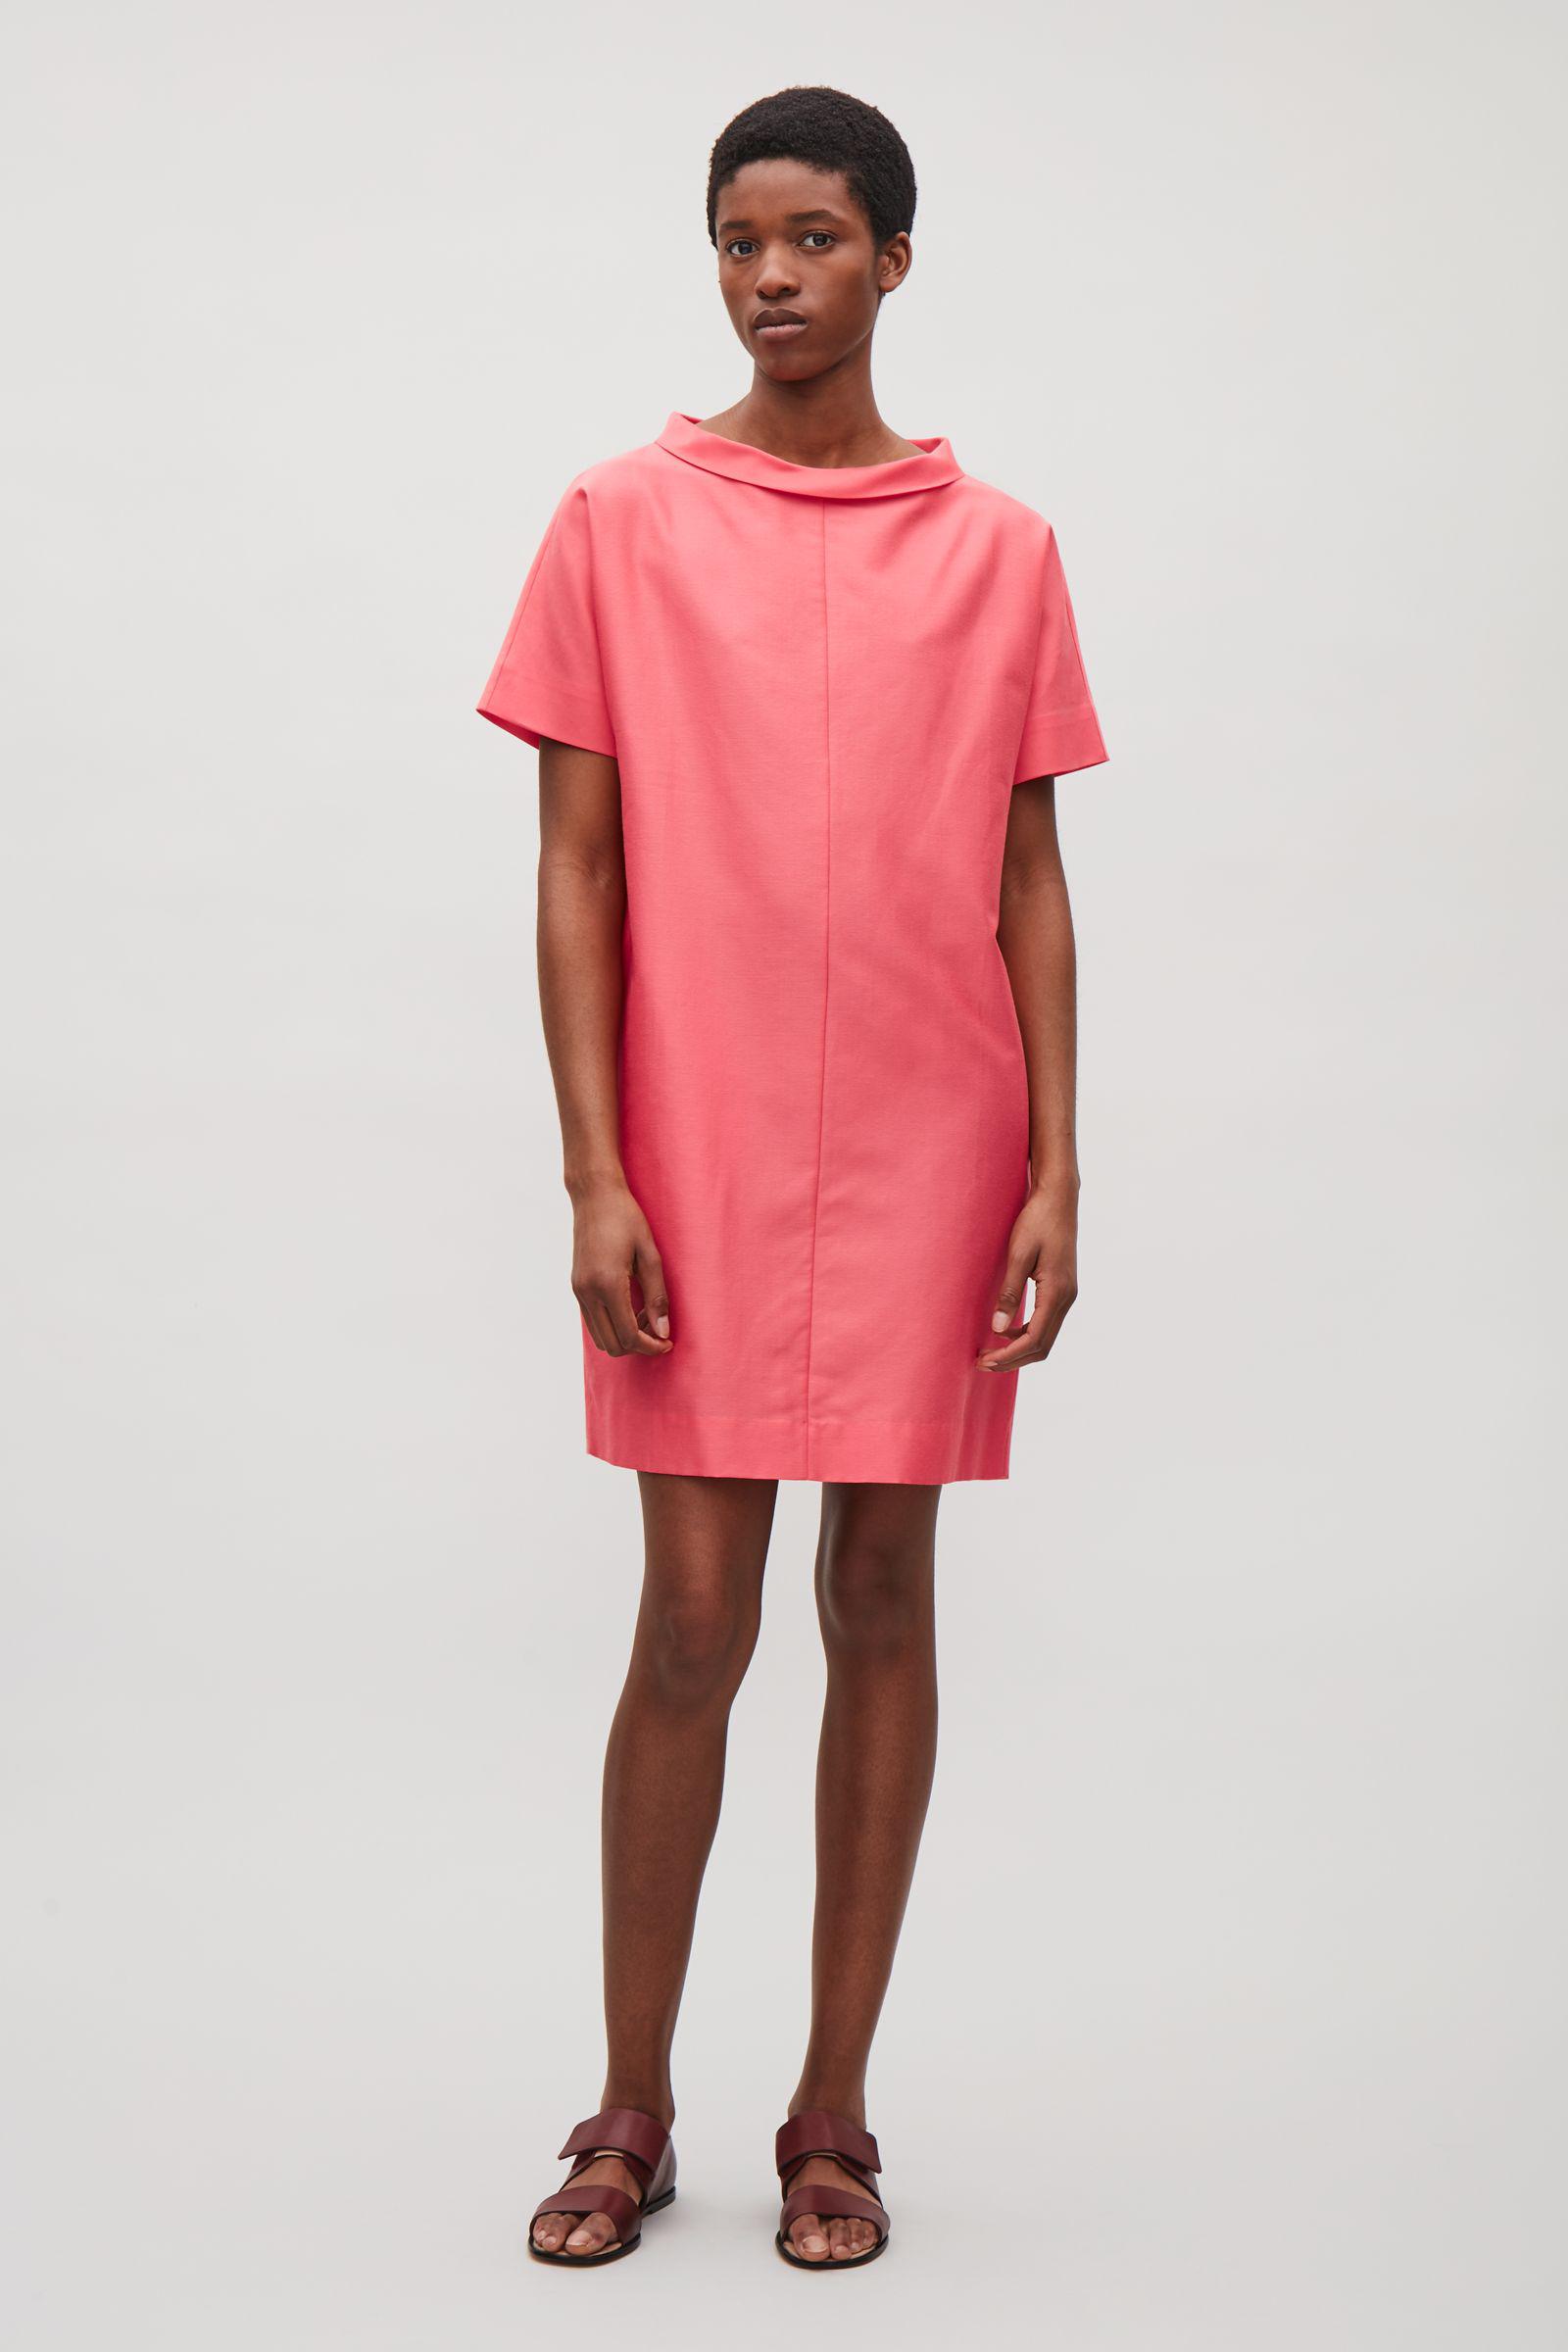 COS Cotton Dress With Folded Collar in ...